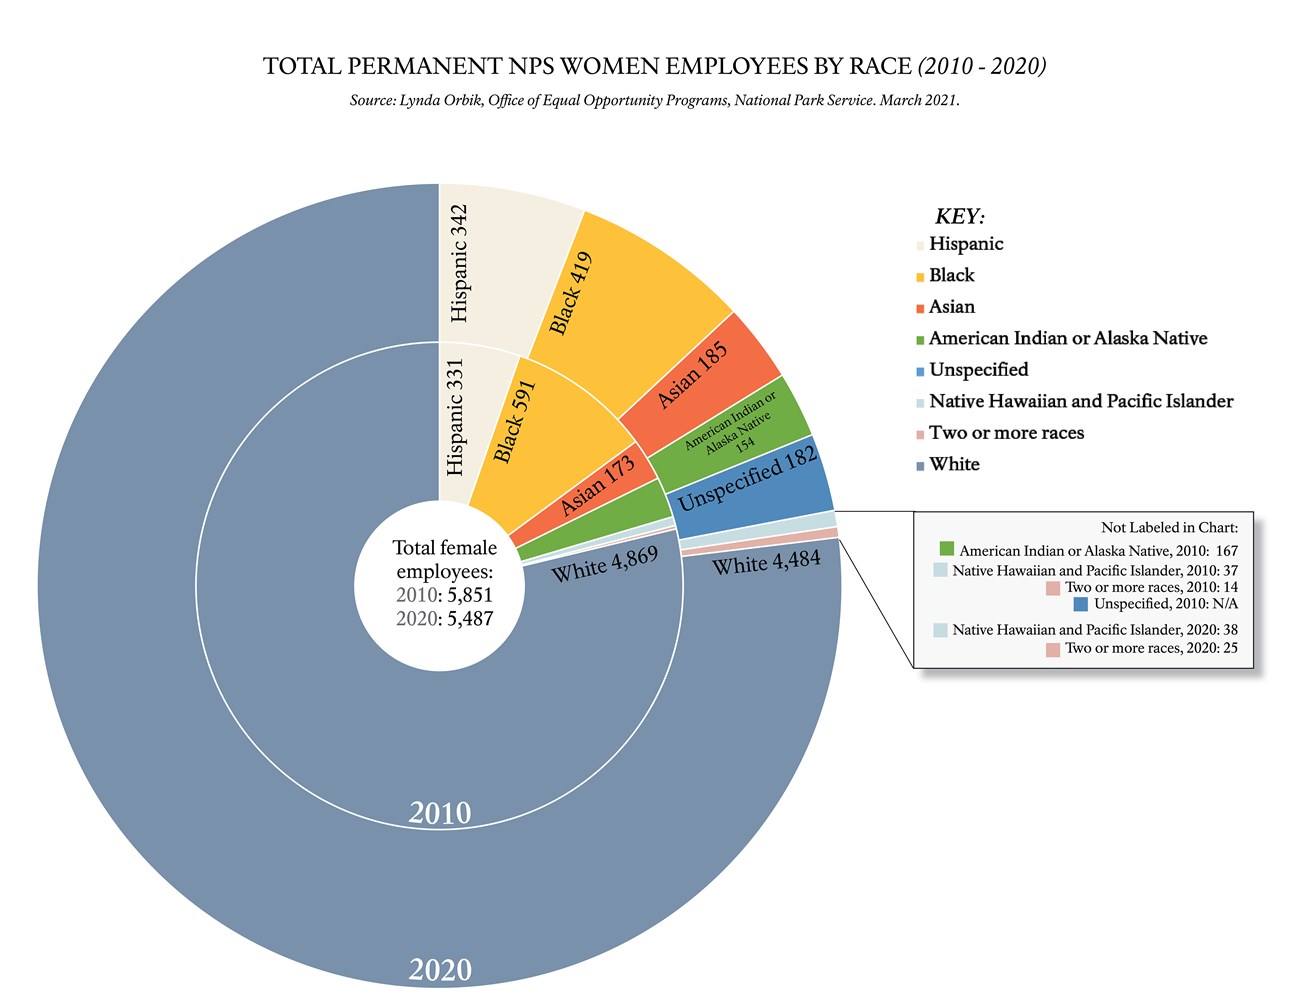 Pie chart depicting the women with permanent NPS positions by race (2010-2020).